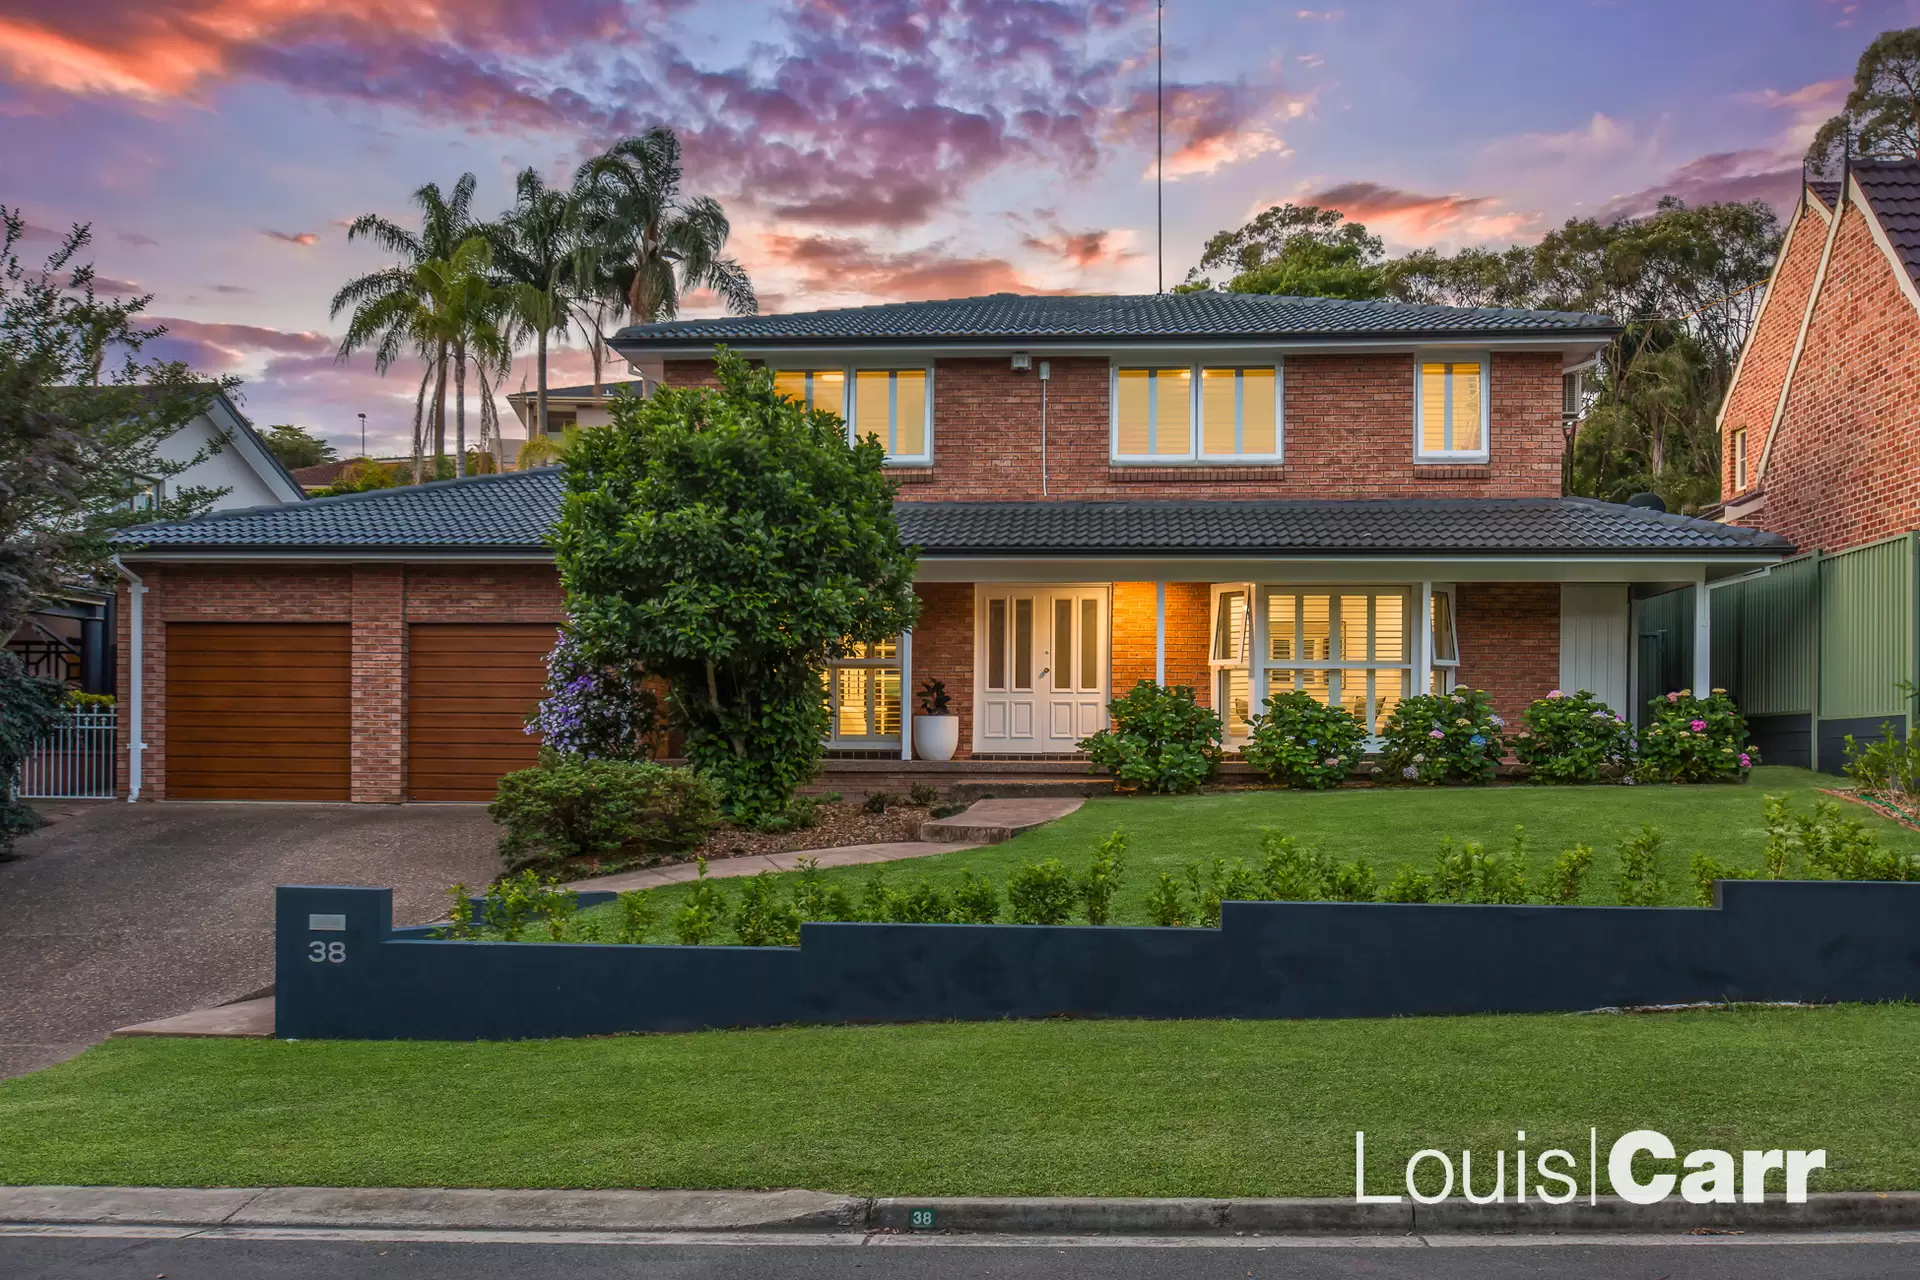 Photo #1: 38 Coonara Avenue, West Pennant Hills - Sold by Louis Carr Real Estate